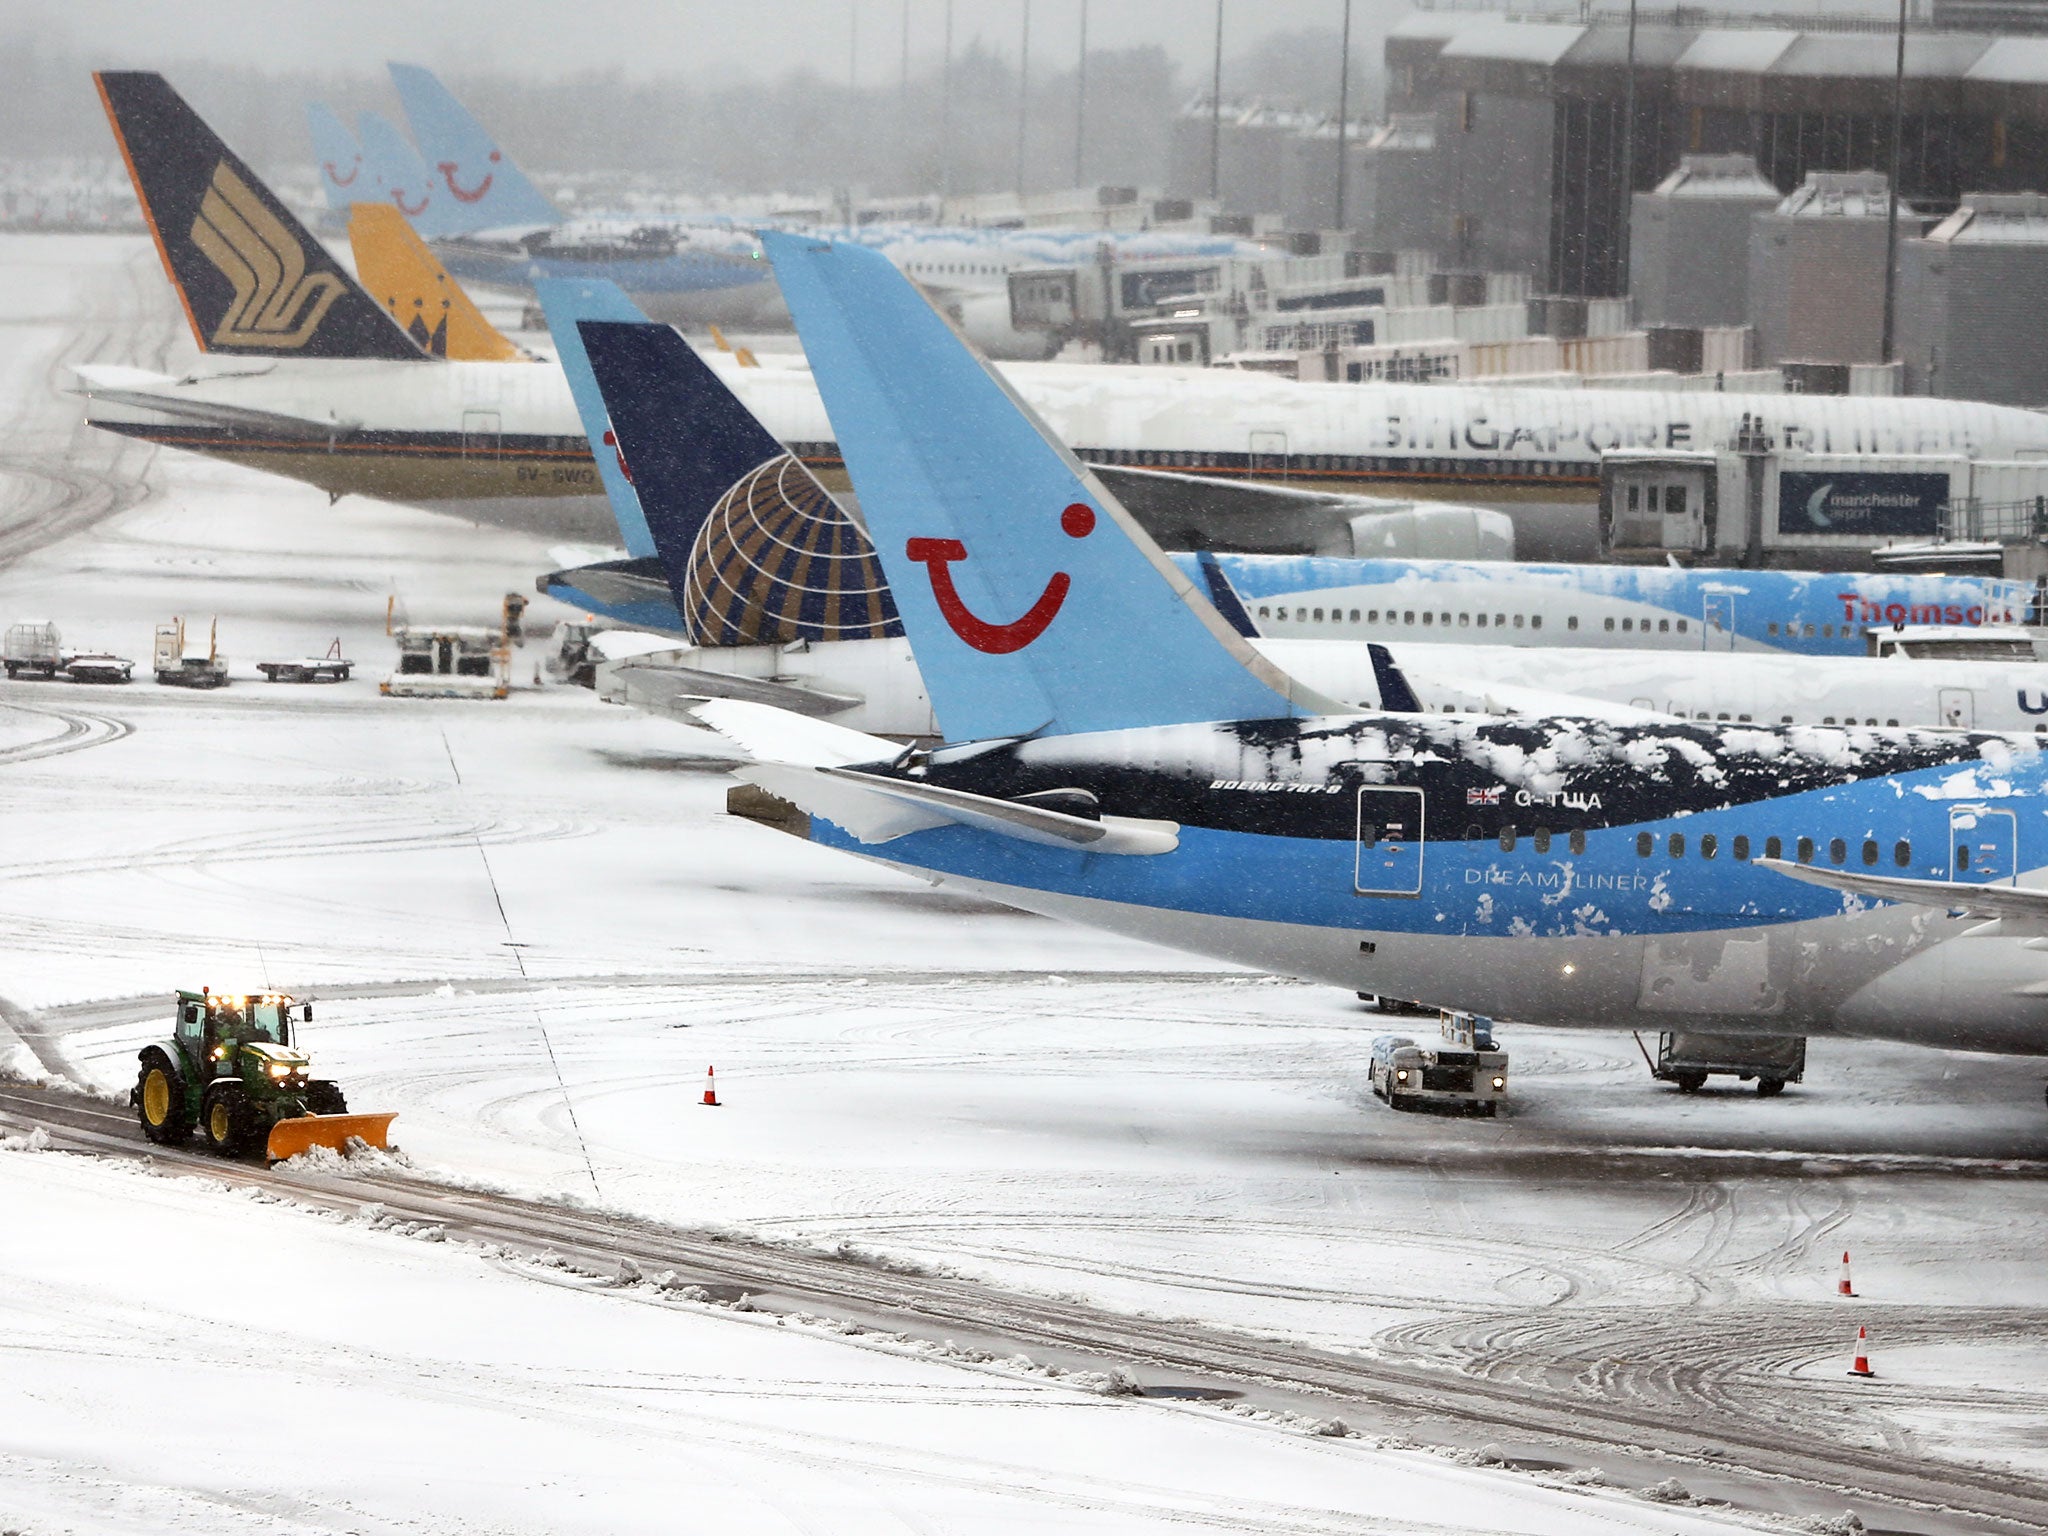 Tractors clear the snow from the runways at Manchester Airport's Terminal 1